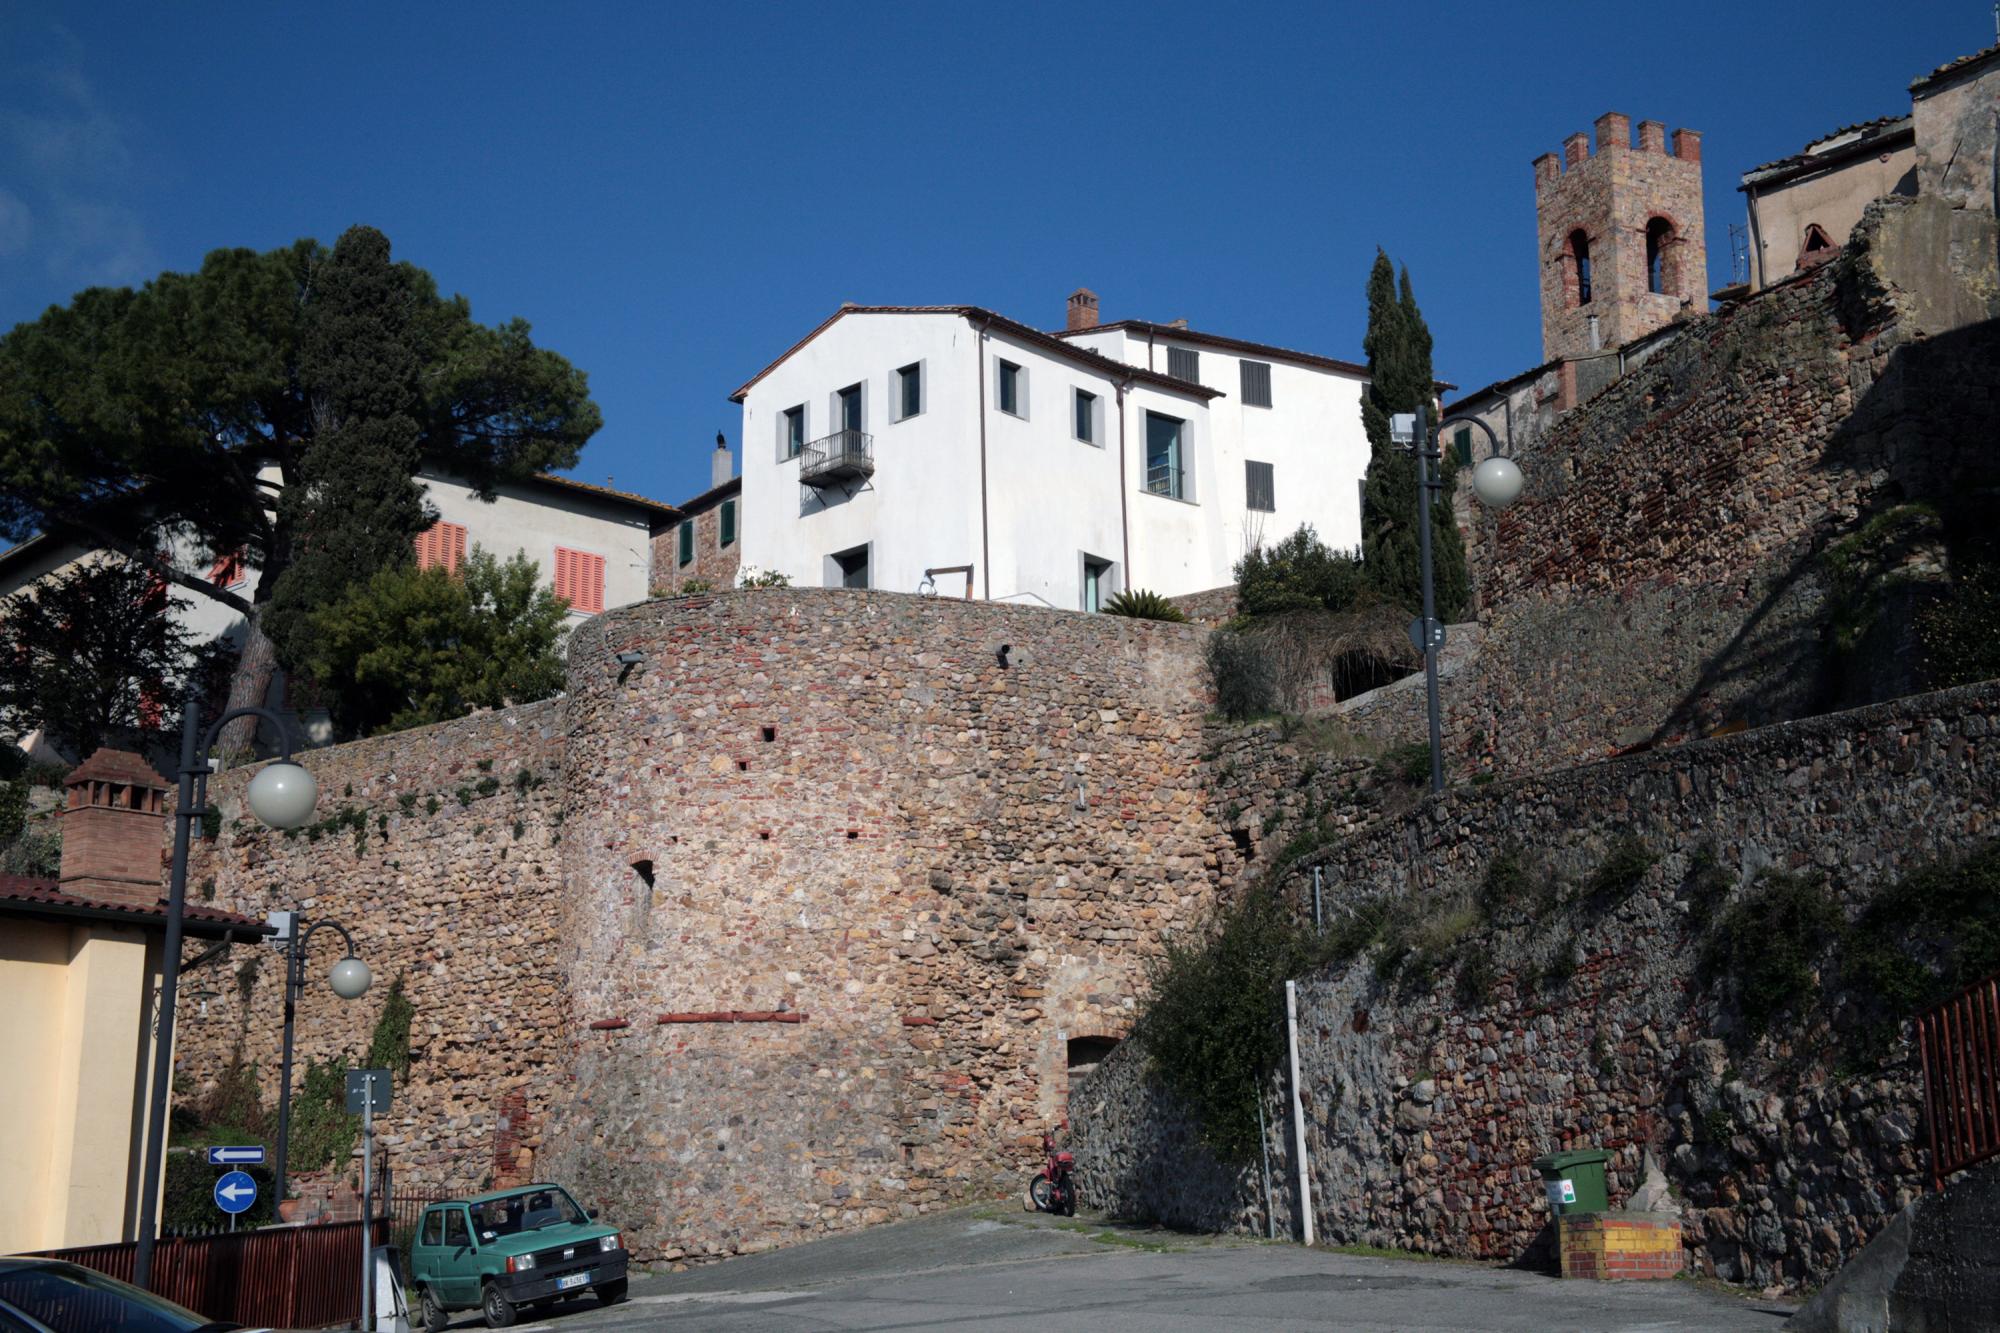 The walls of Montepescali